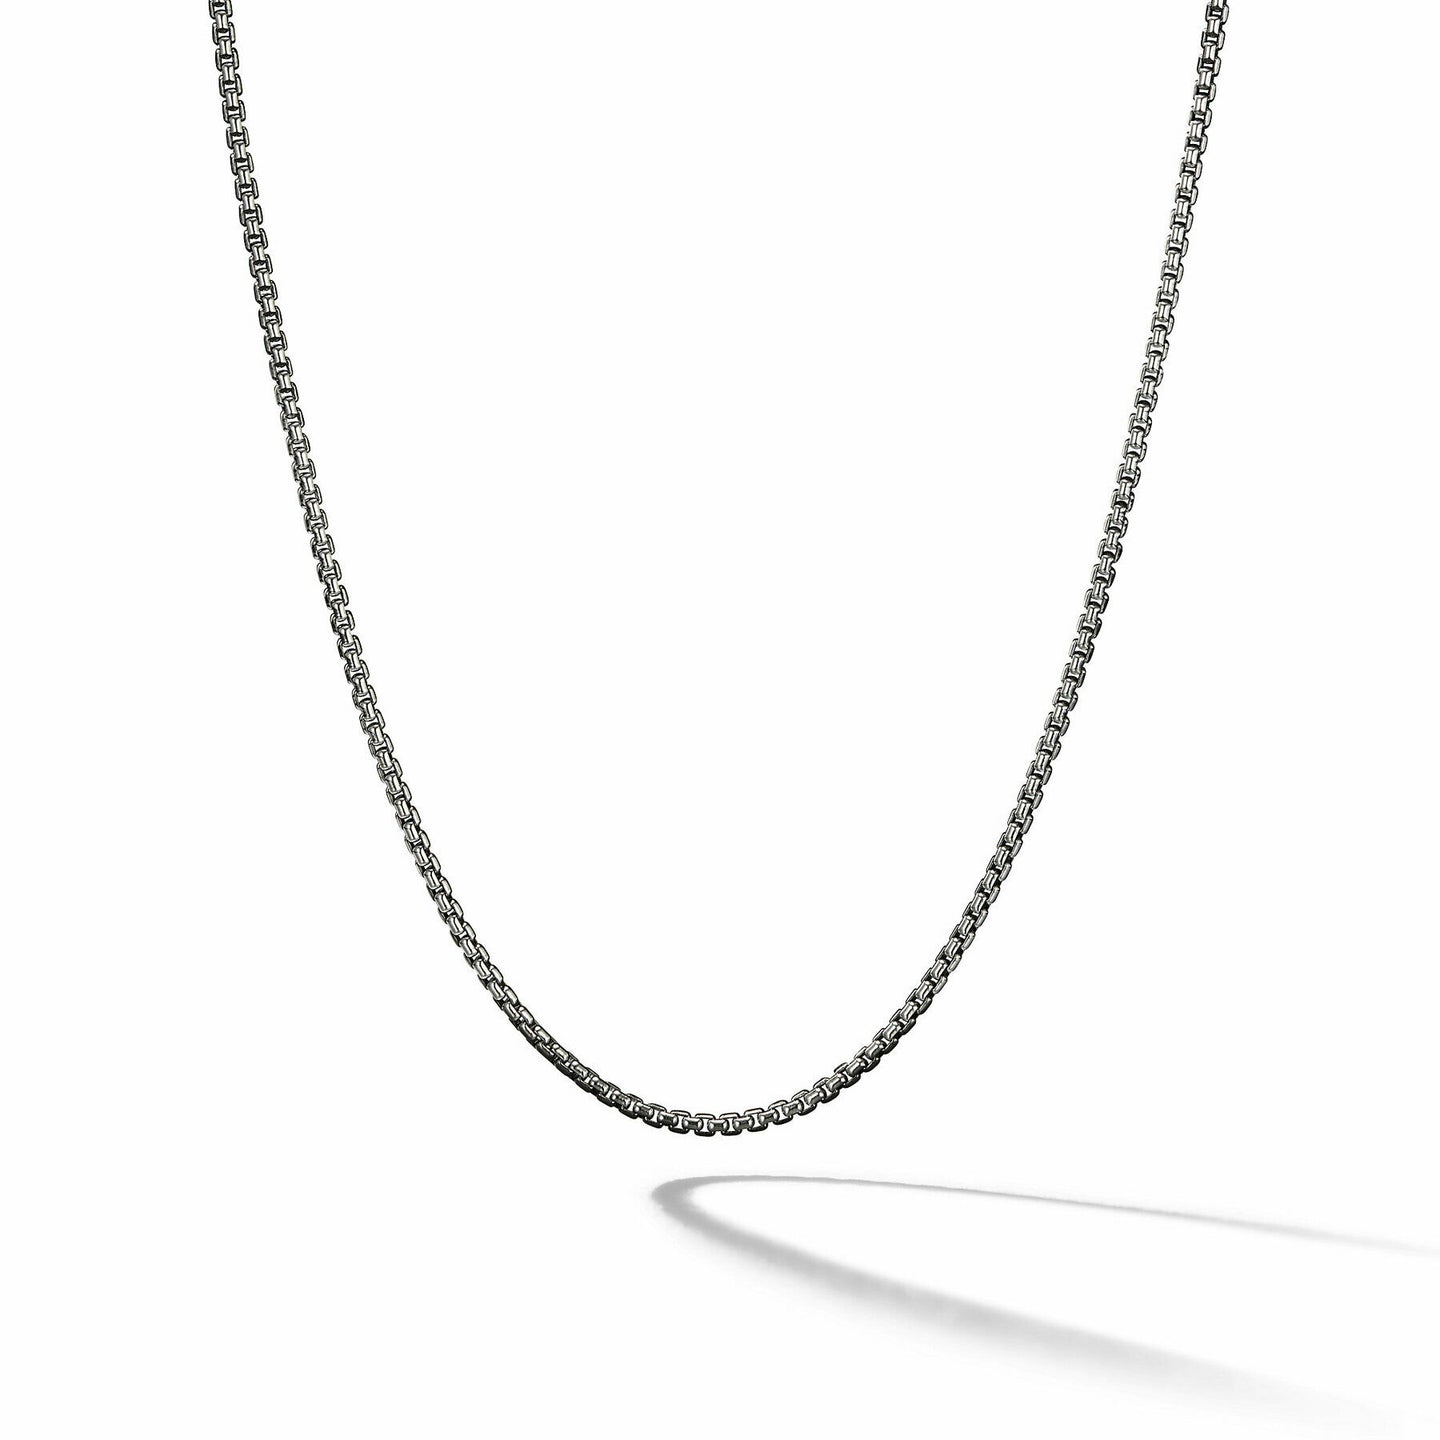 David Yurman The Chain Collection Necklaces & Pendant in Sterling Silver